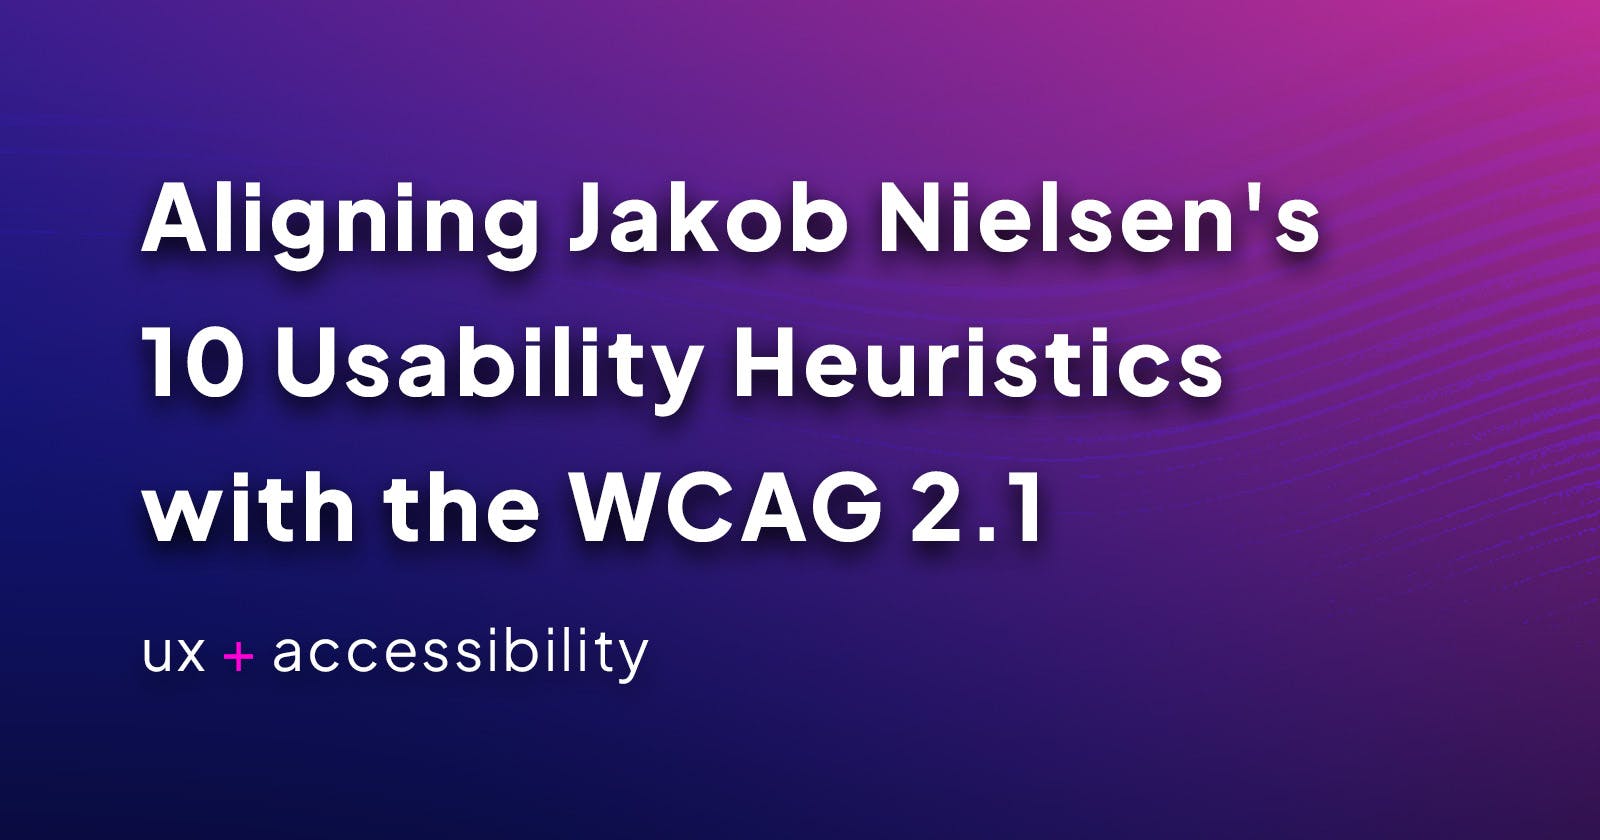 Aligning Jakob Nielsen's 10 Usability Heuristics with the WCAG 2.1